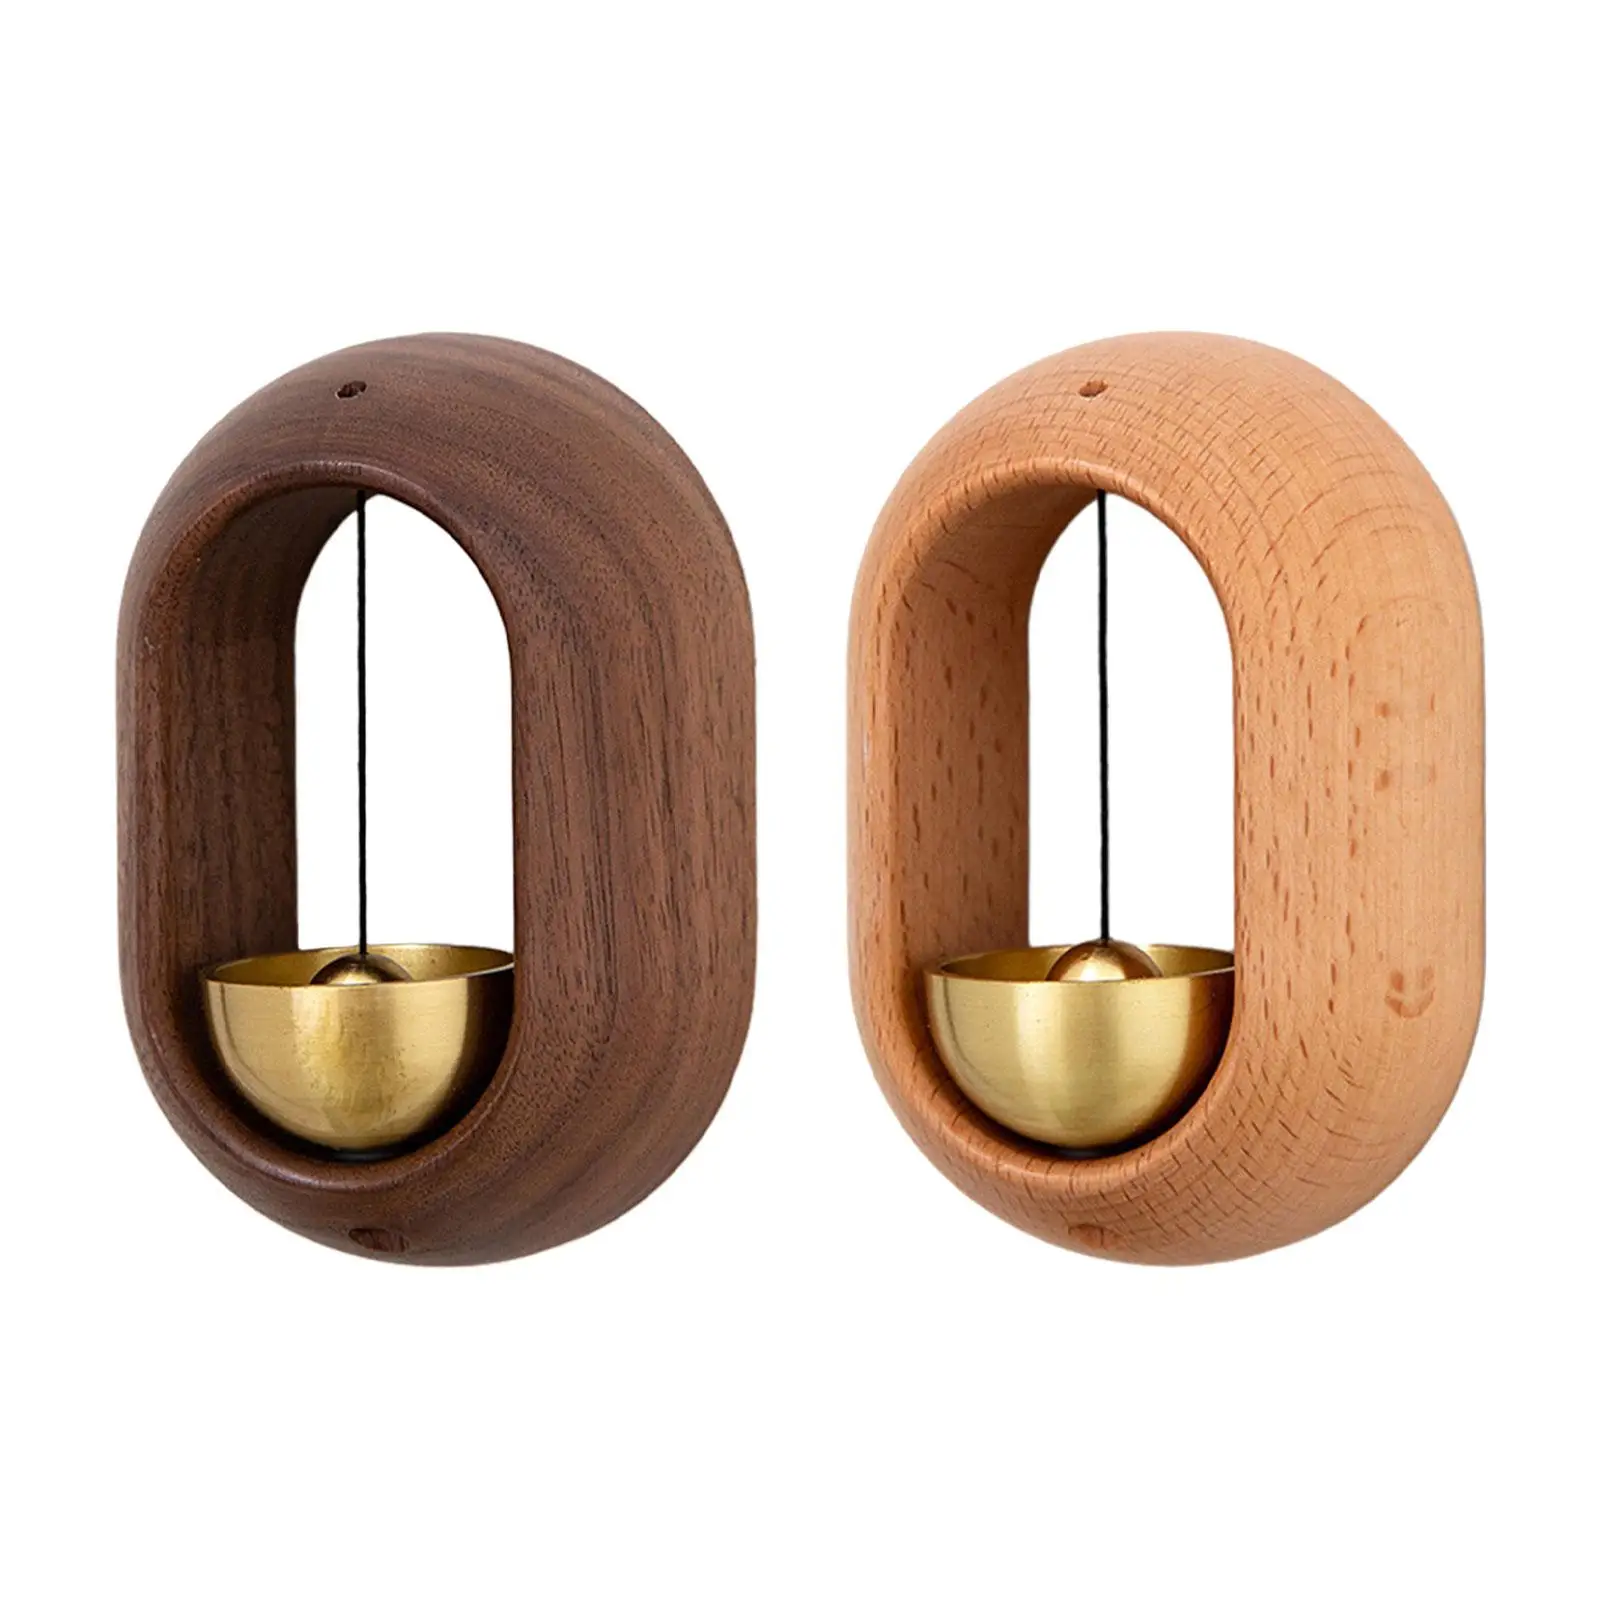 

Shopkeepers Bell Japanese Style Wood Hanging Bell Gate Bell Chime Wood Doorbells for Wardrobe Shop Business Office Barn Door